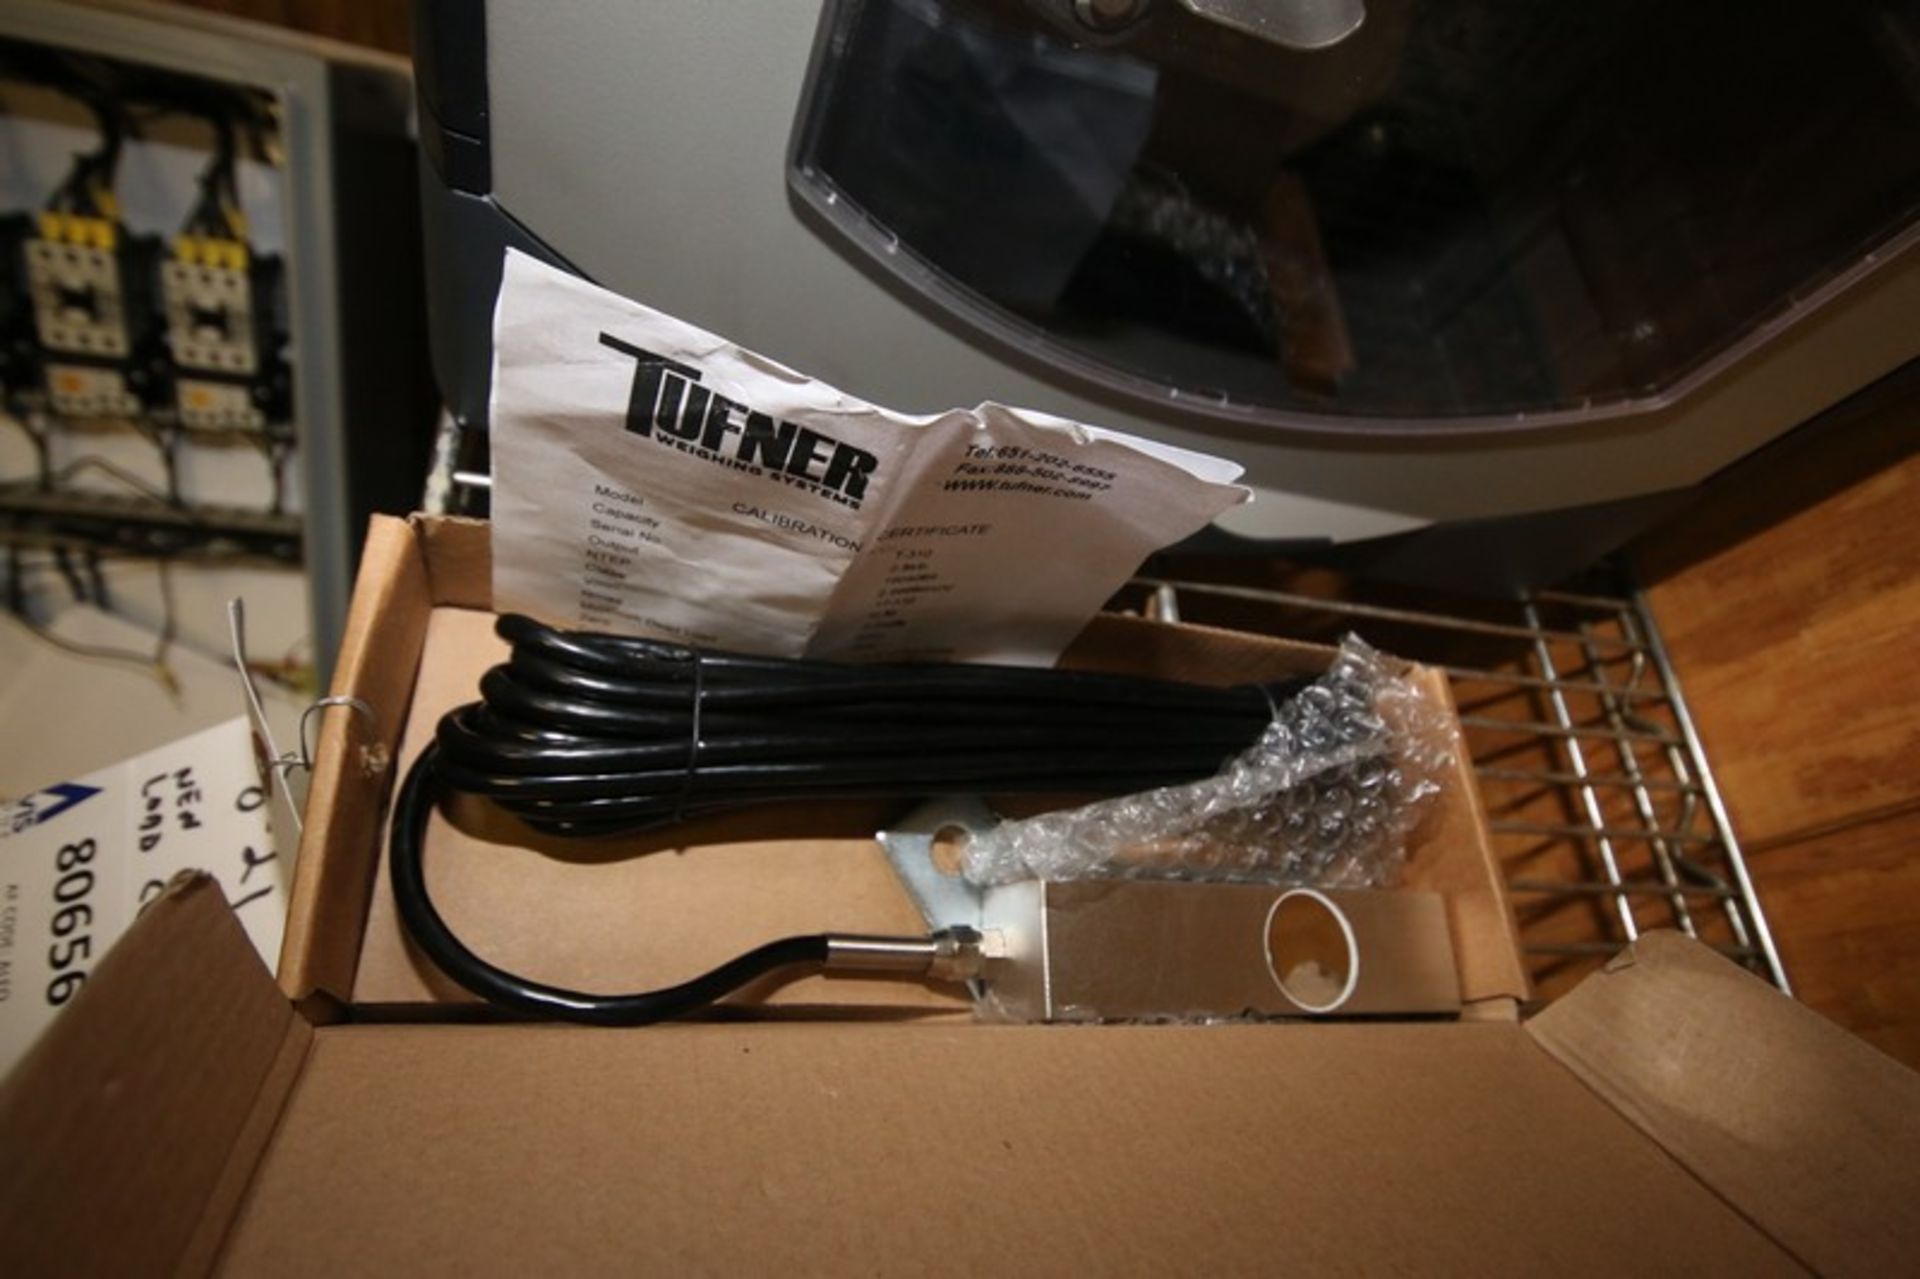 NIB Tufner Scale Load Cell Model T-310 (INV#80656)(Located @ the MDG Auction Showroom in Pgh., PA)(